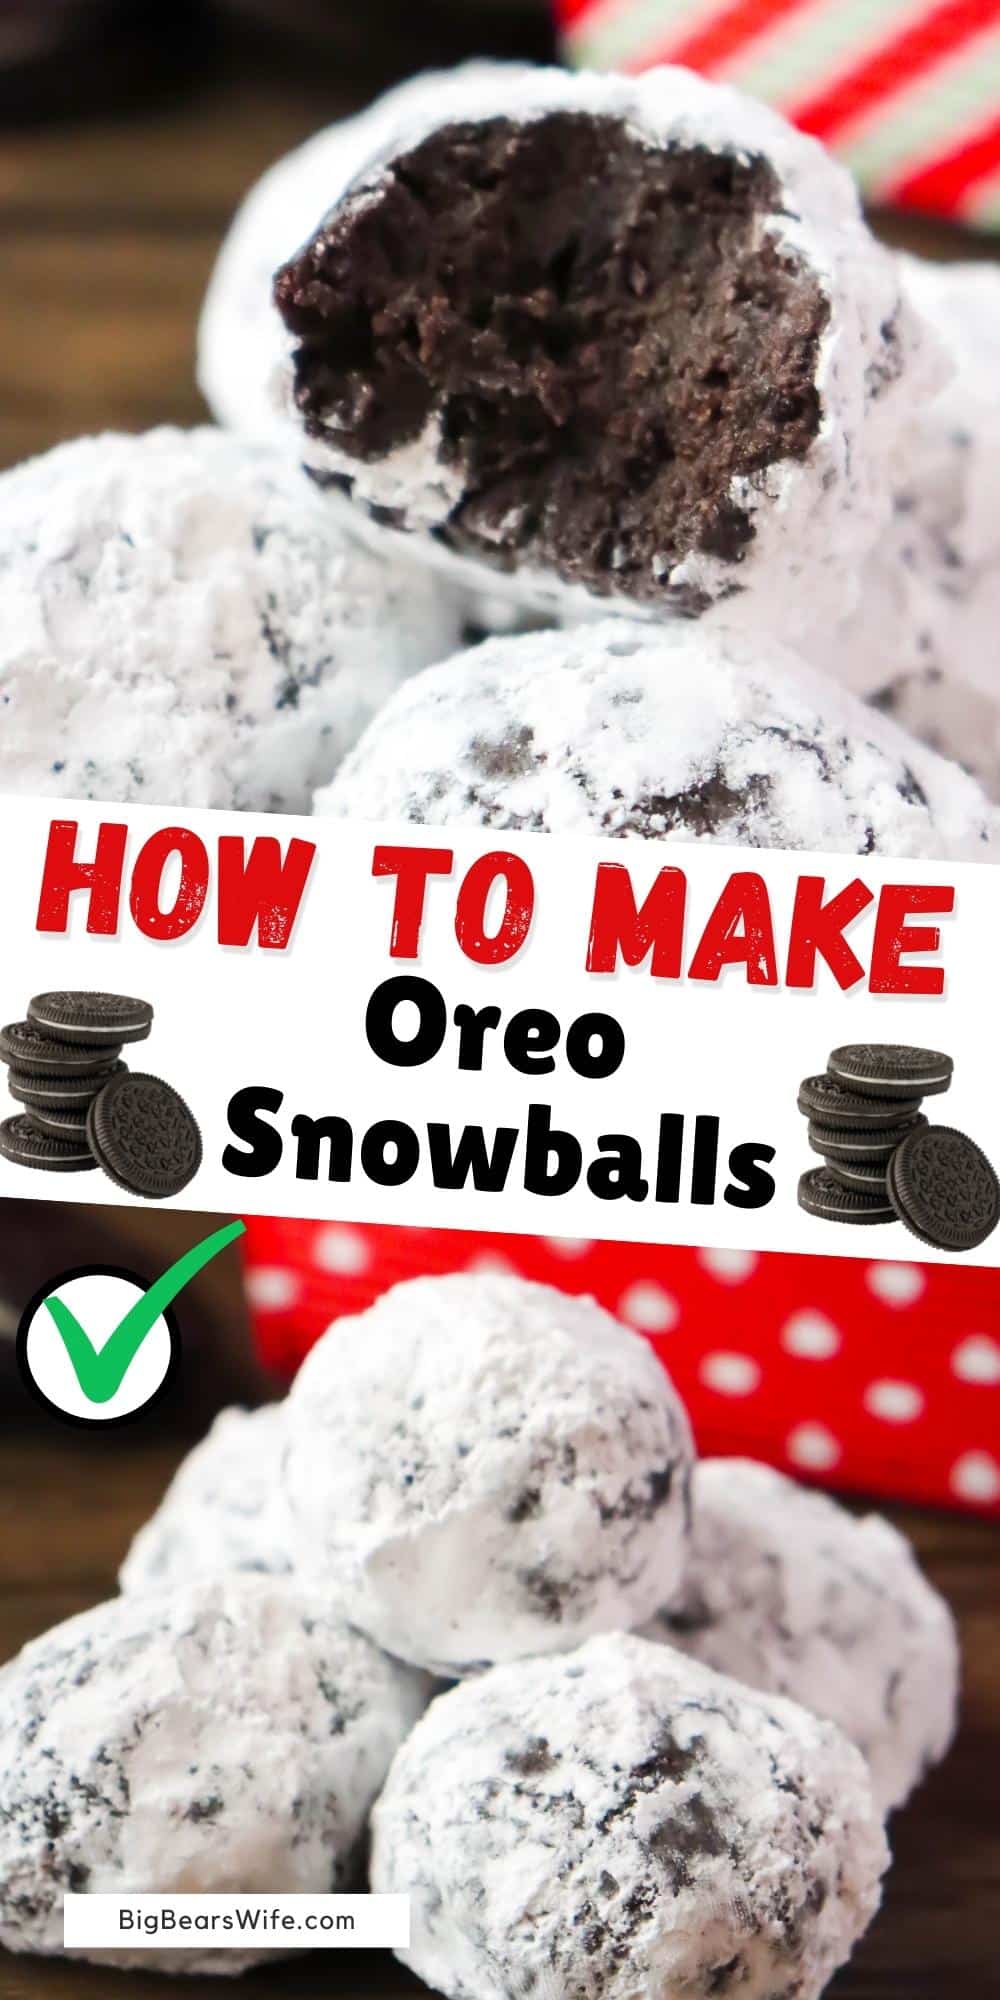 These fun treats are made with crushed OREO cookies and then rolled in powdered sugar for the perfect “snowy” looking dessert! Perfect for any holiday or Christmas party!  via @bigbearswife